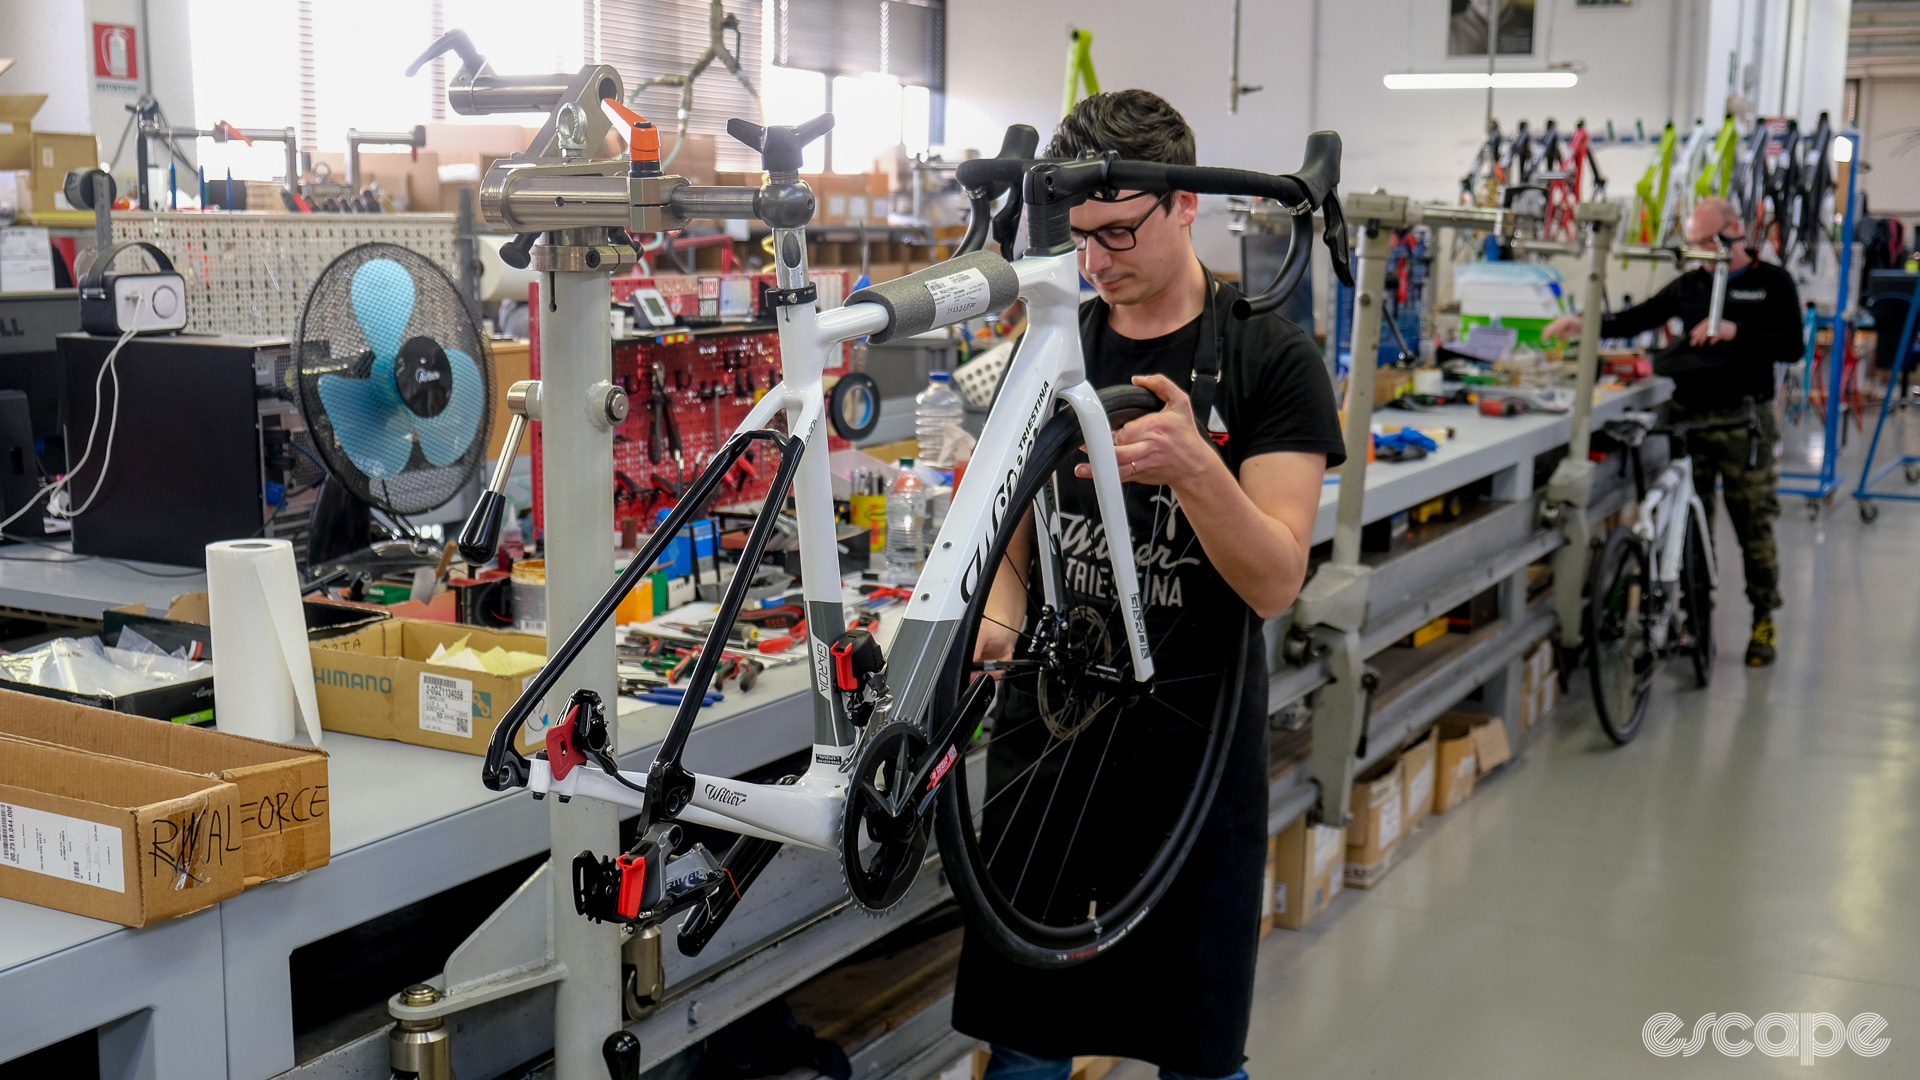 The photo shows a mechanic inserting a front wheel on a bike. 